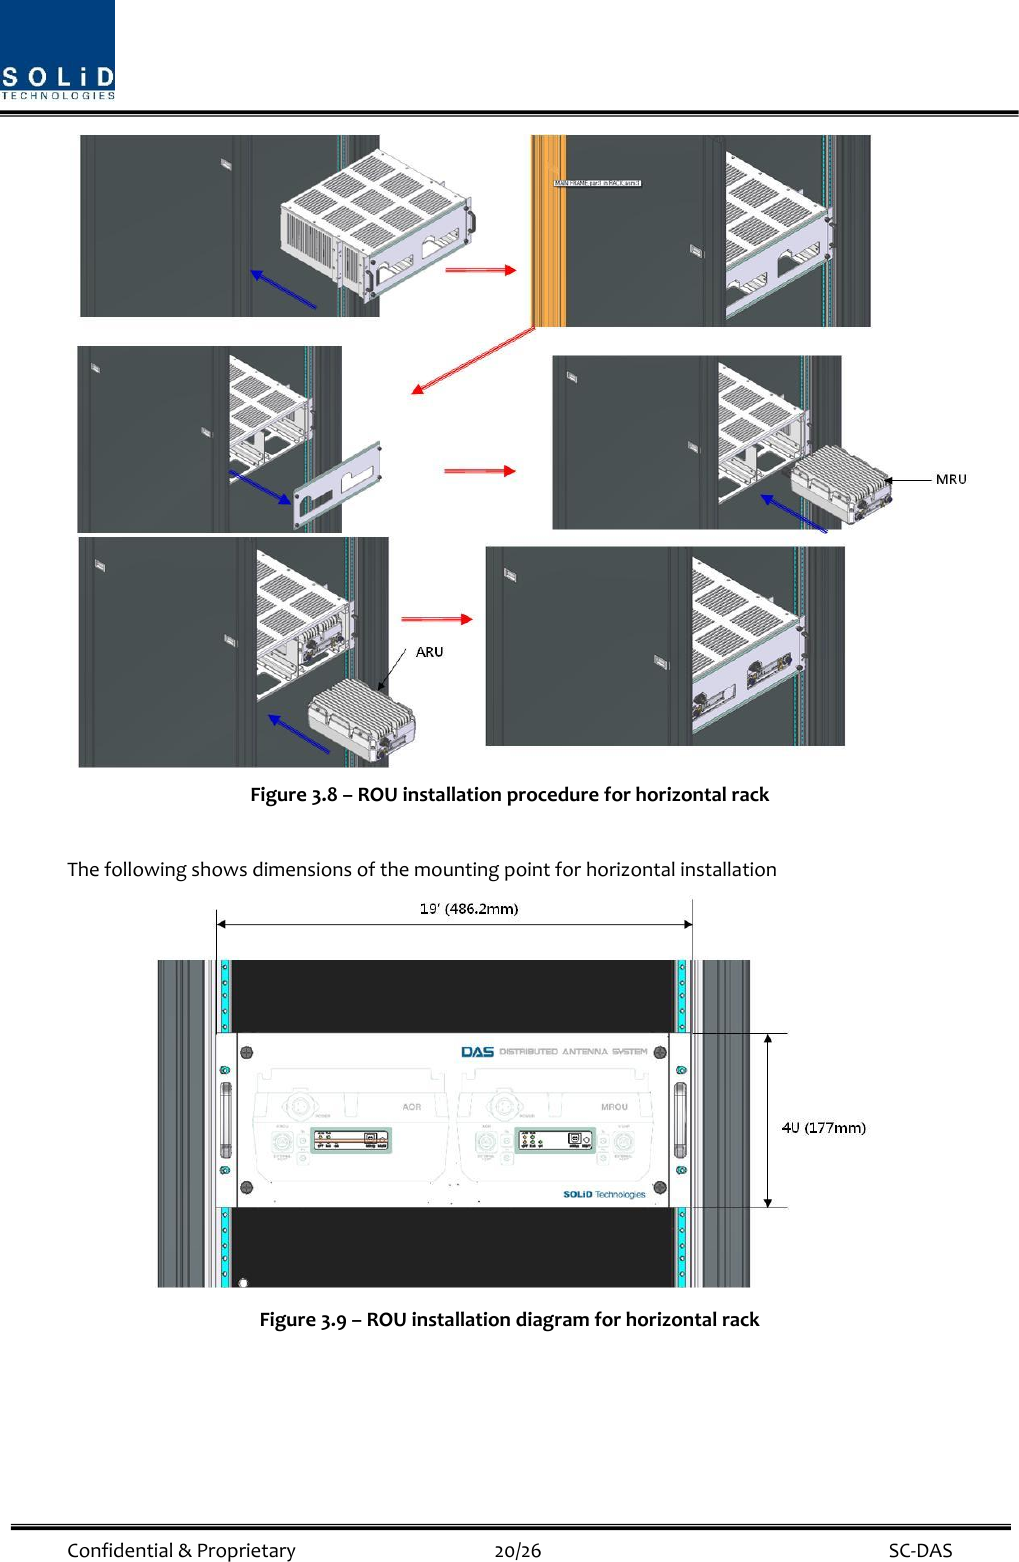  Confidential &amp; Proprietary                                      20/26    SC-DAS  Figure 3.8 – ROU installation procedure for horizontal rack    The following shows dimensions of the mounting point for horizontal installation  Figure 3.9 – ROU installation diagram for horizontal rack        